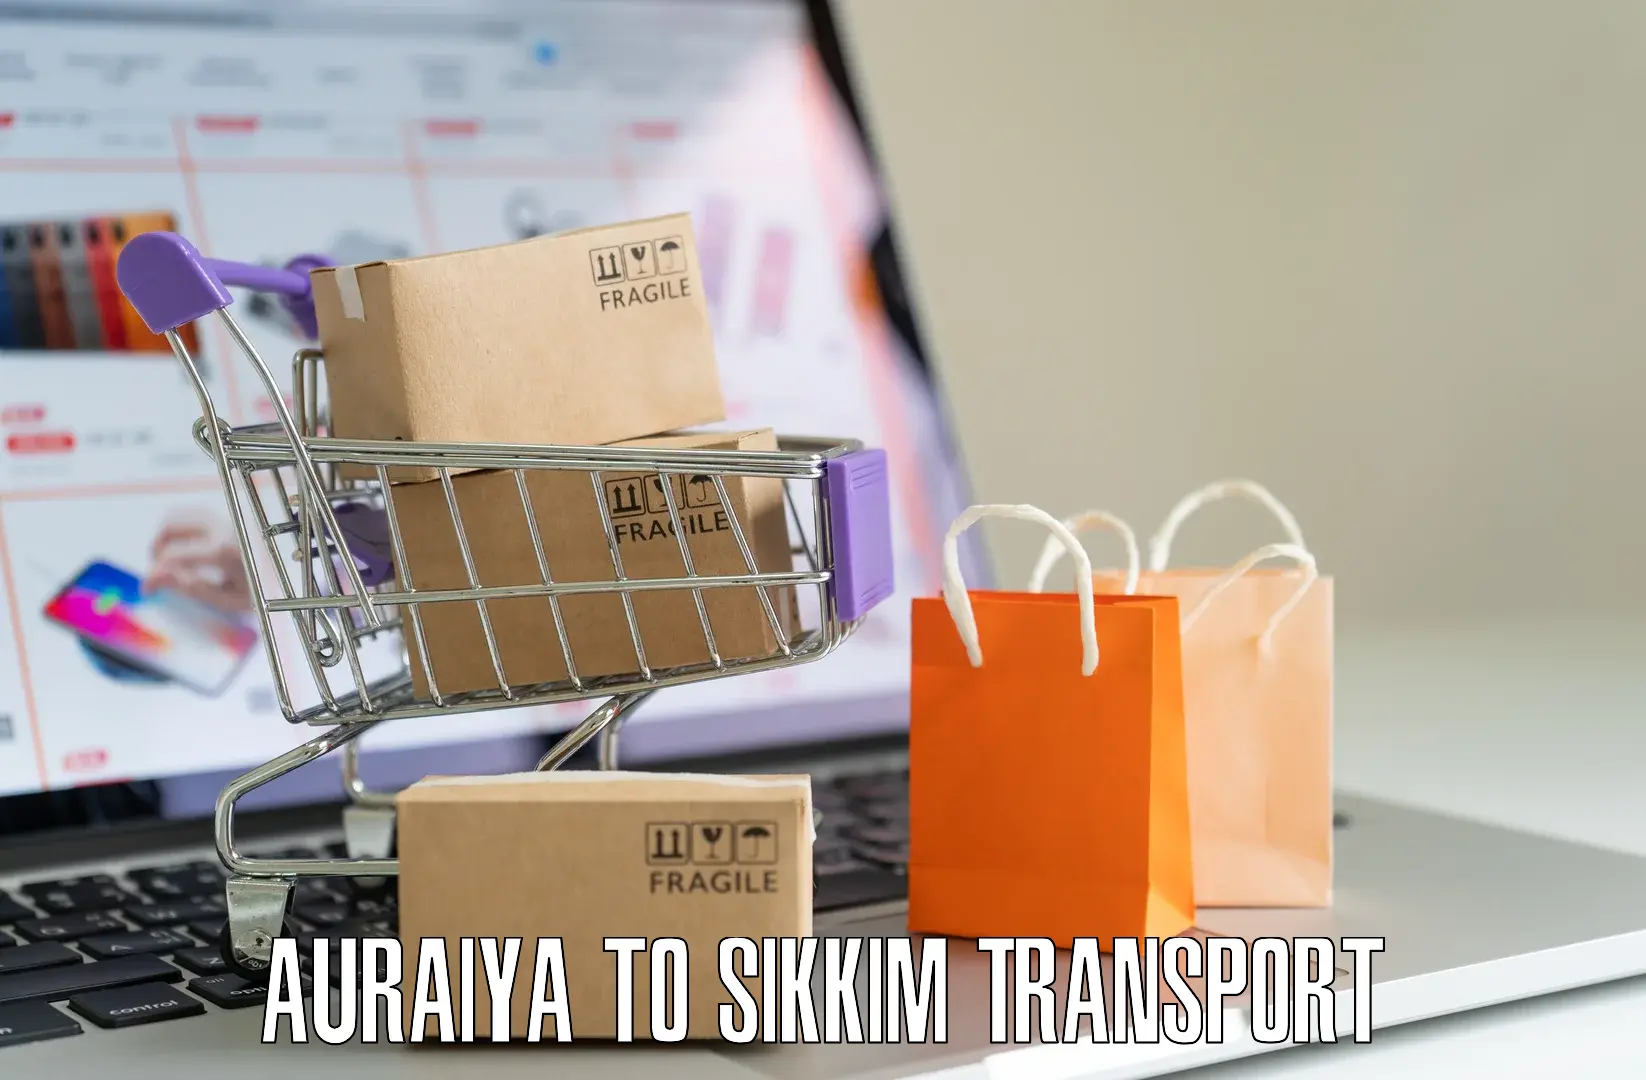 Commercial transport service Auraiya to East Sikkim